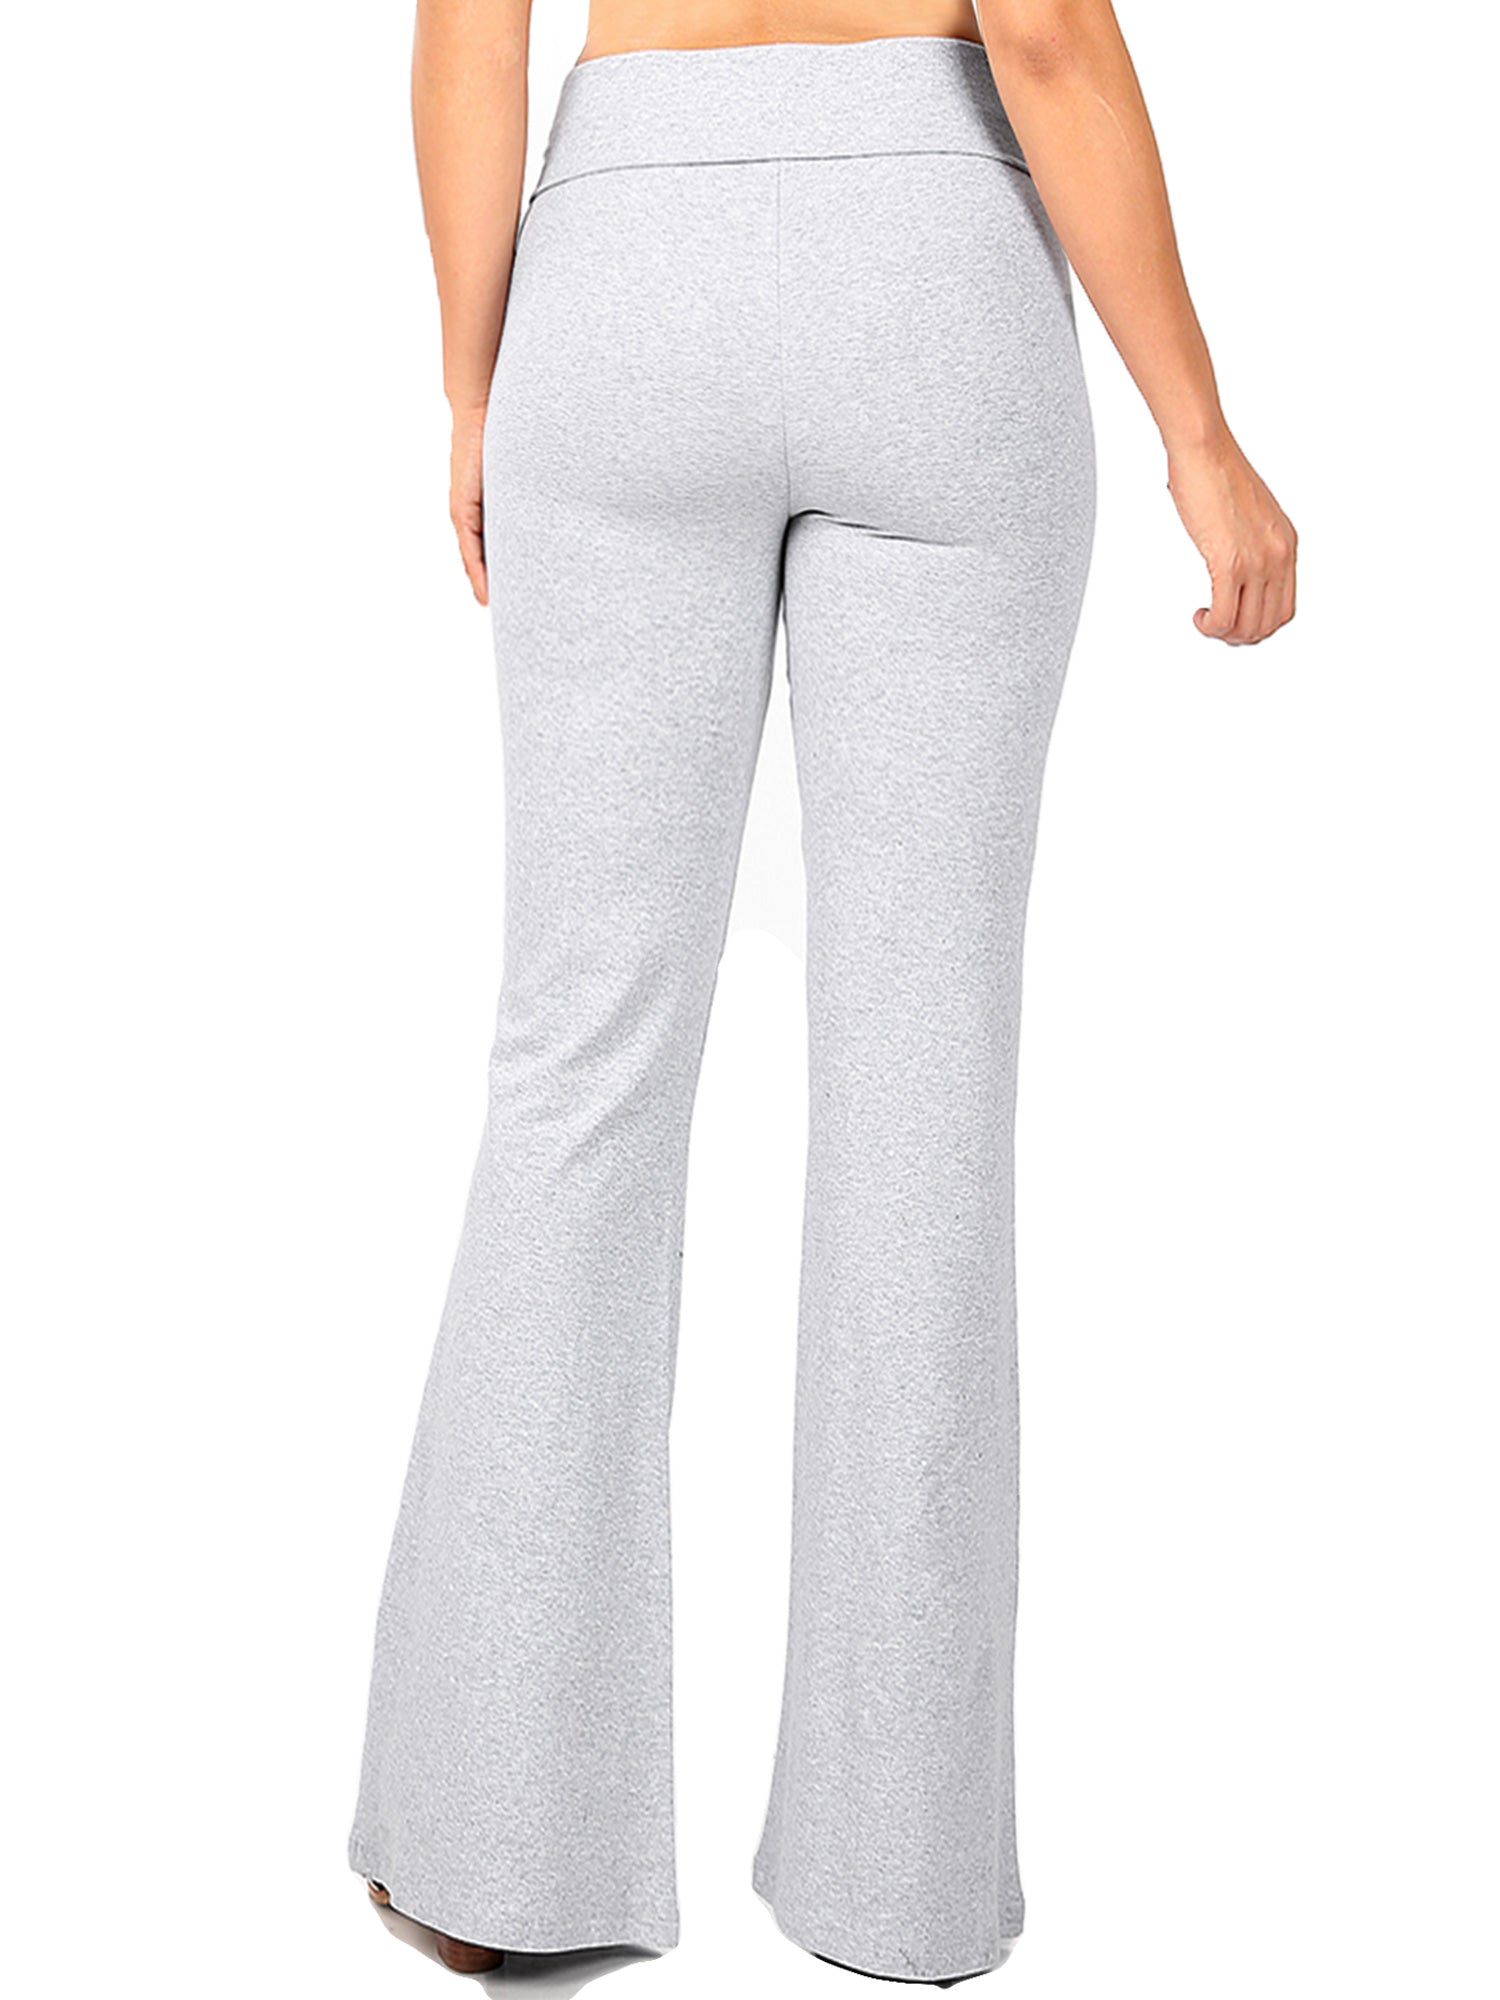 4F Skinny Workout Pants in Light Grey | ABOUT YOU